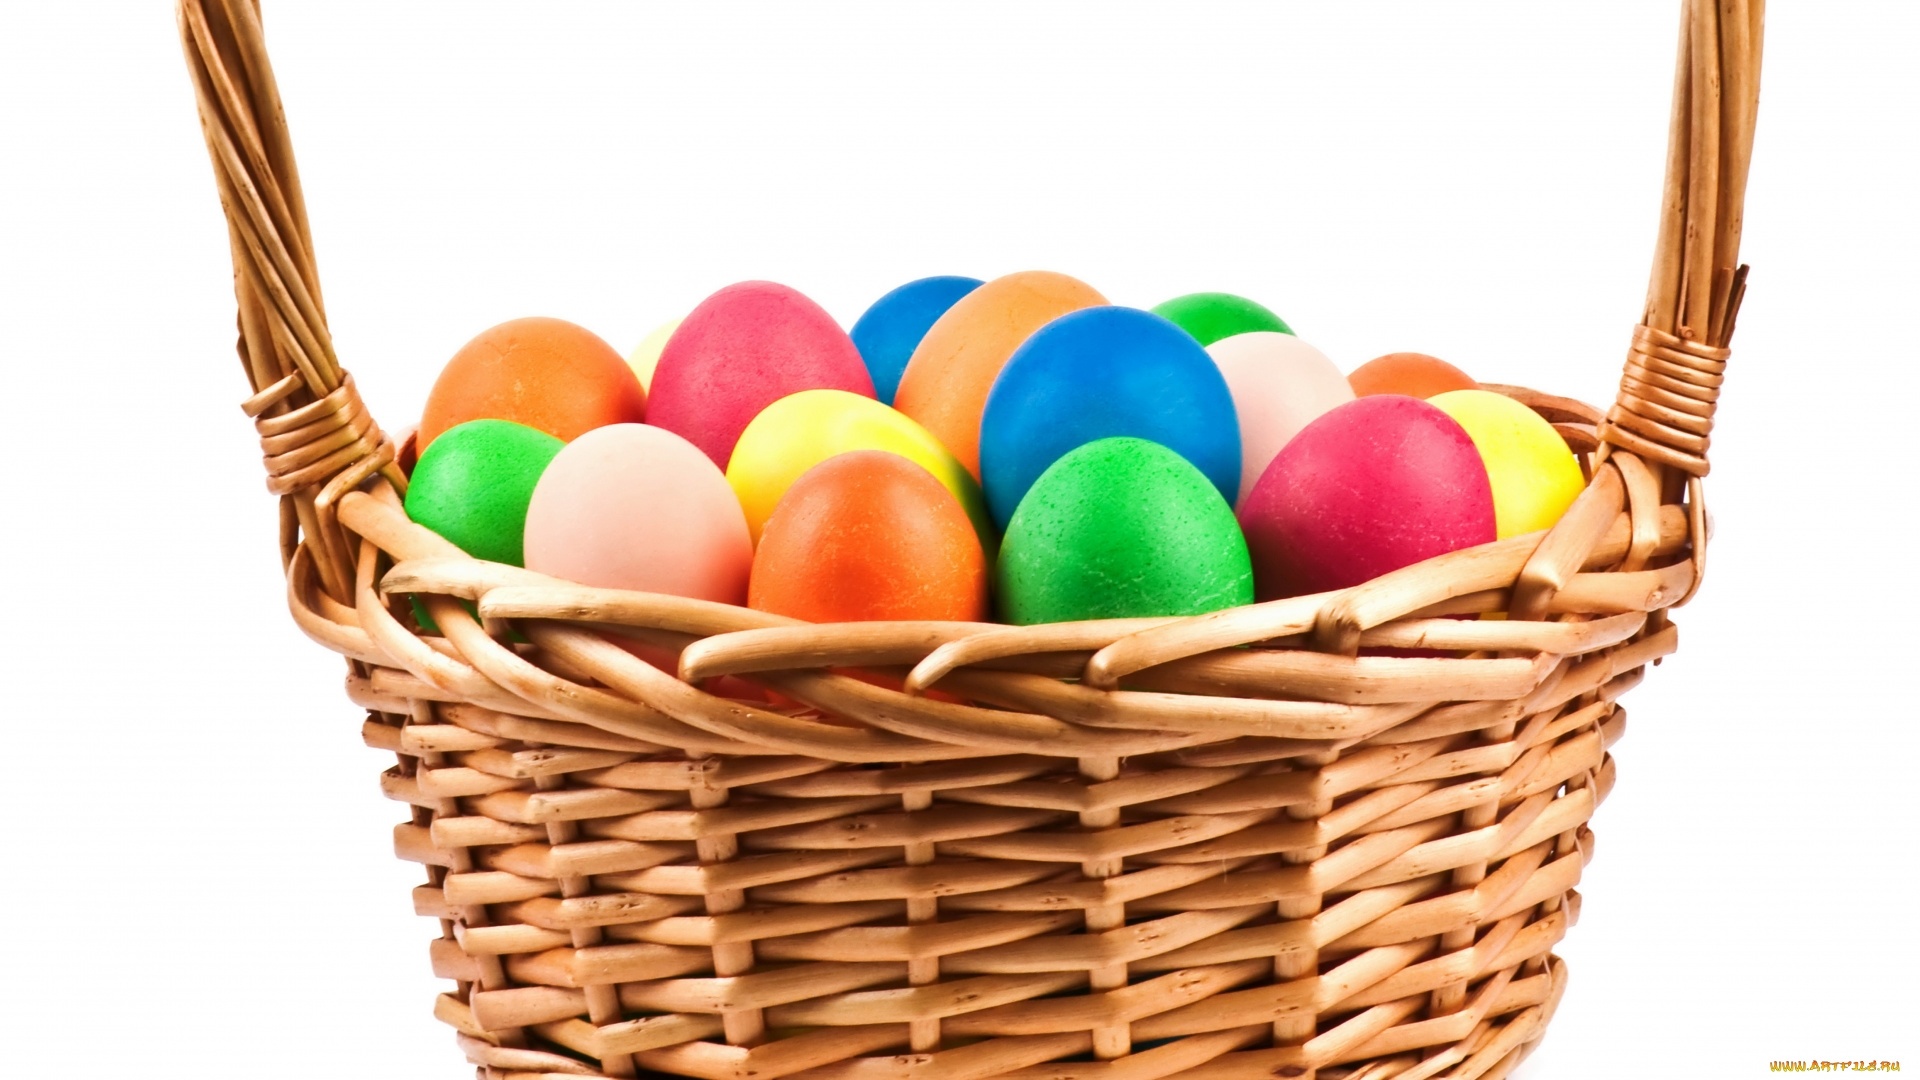 Easter Eggs In A Basket wallpaper for pc